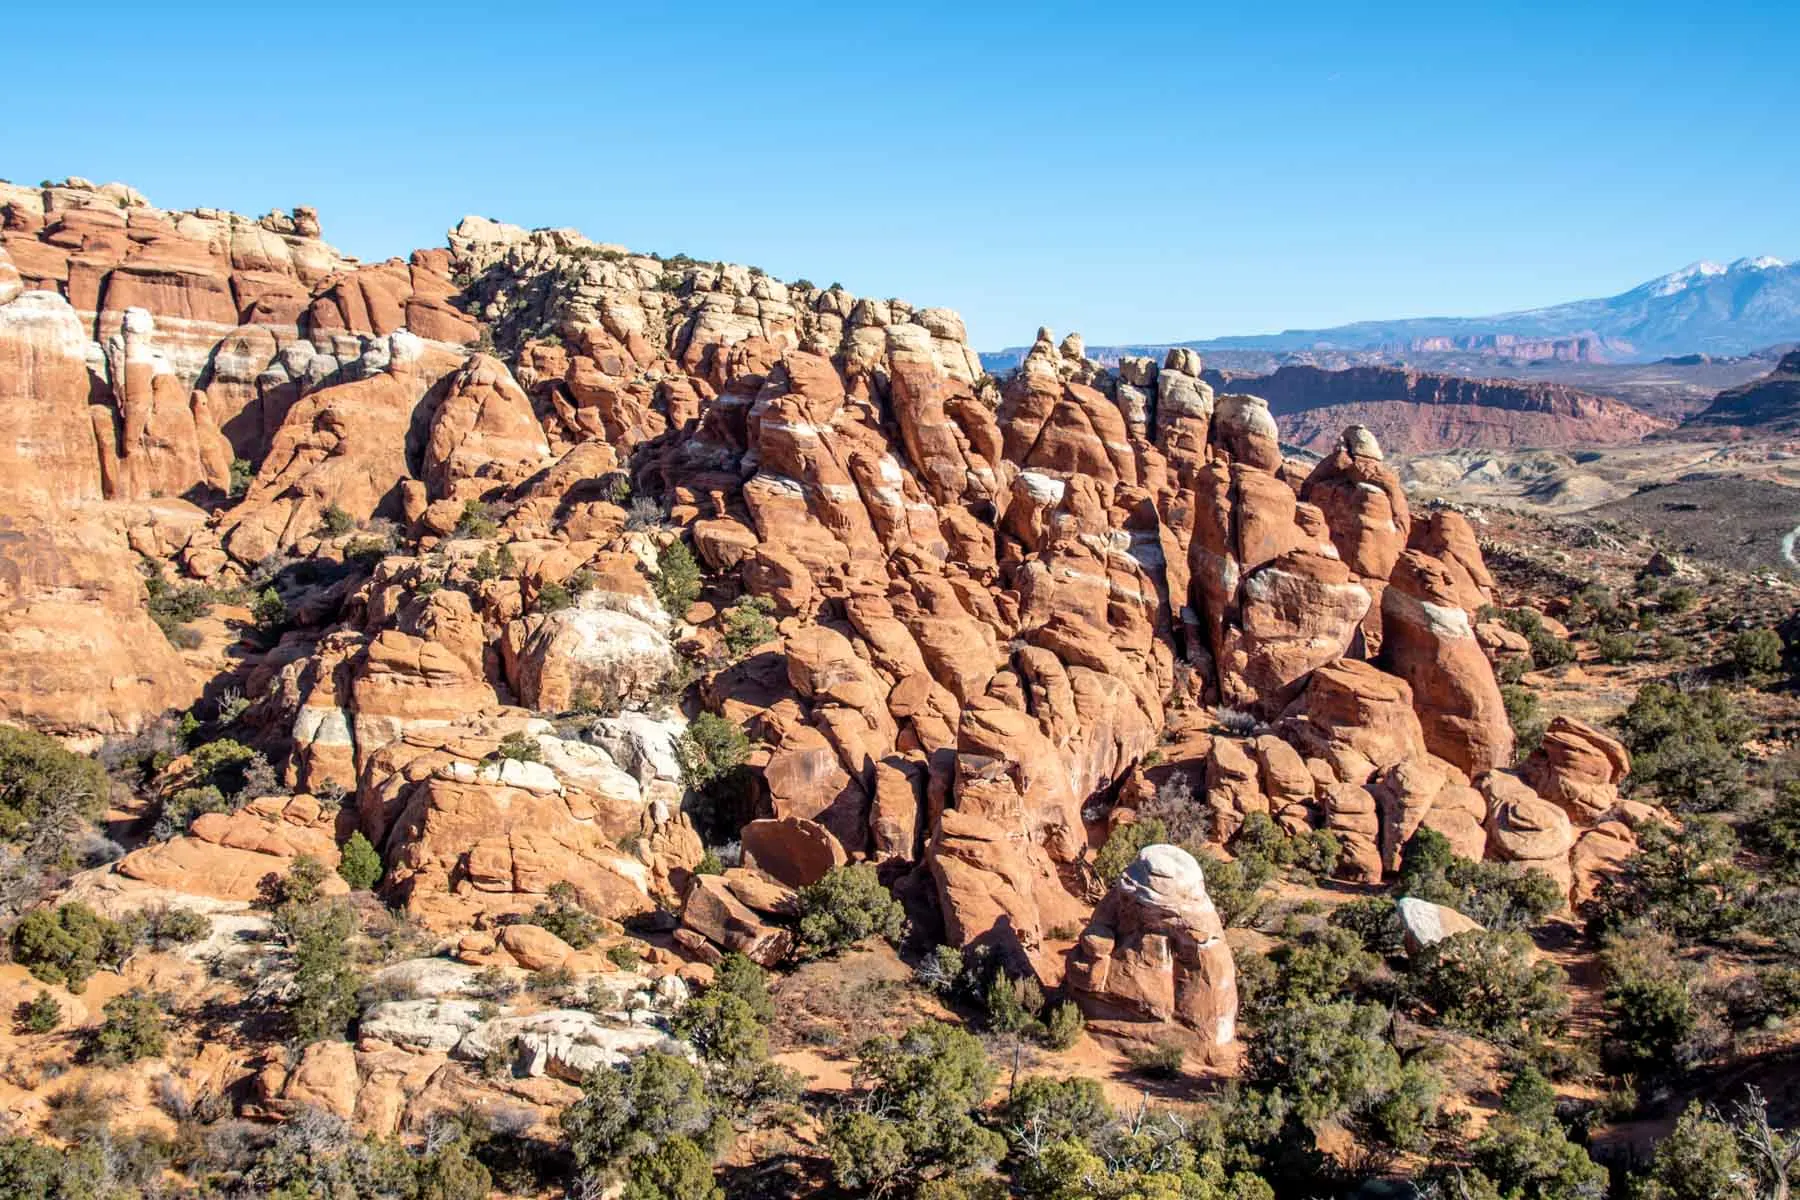 Red sandstone rock formations sticking up